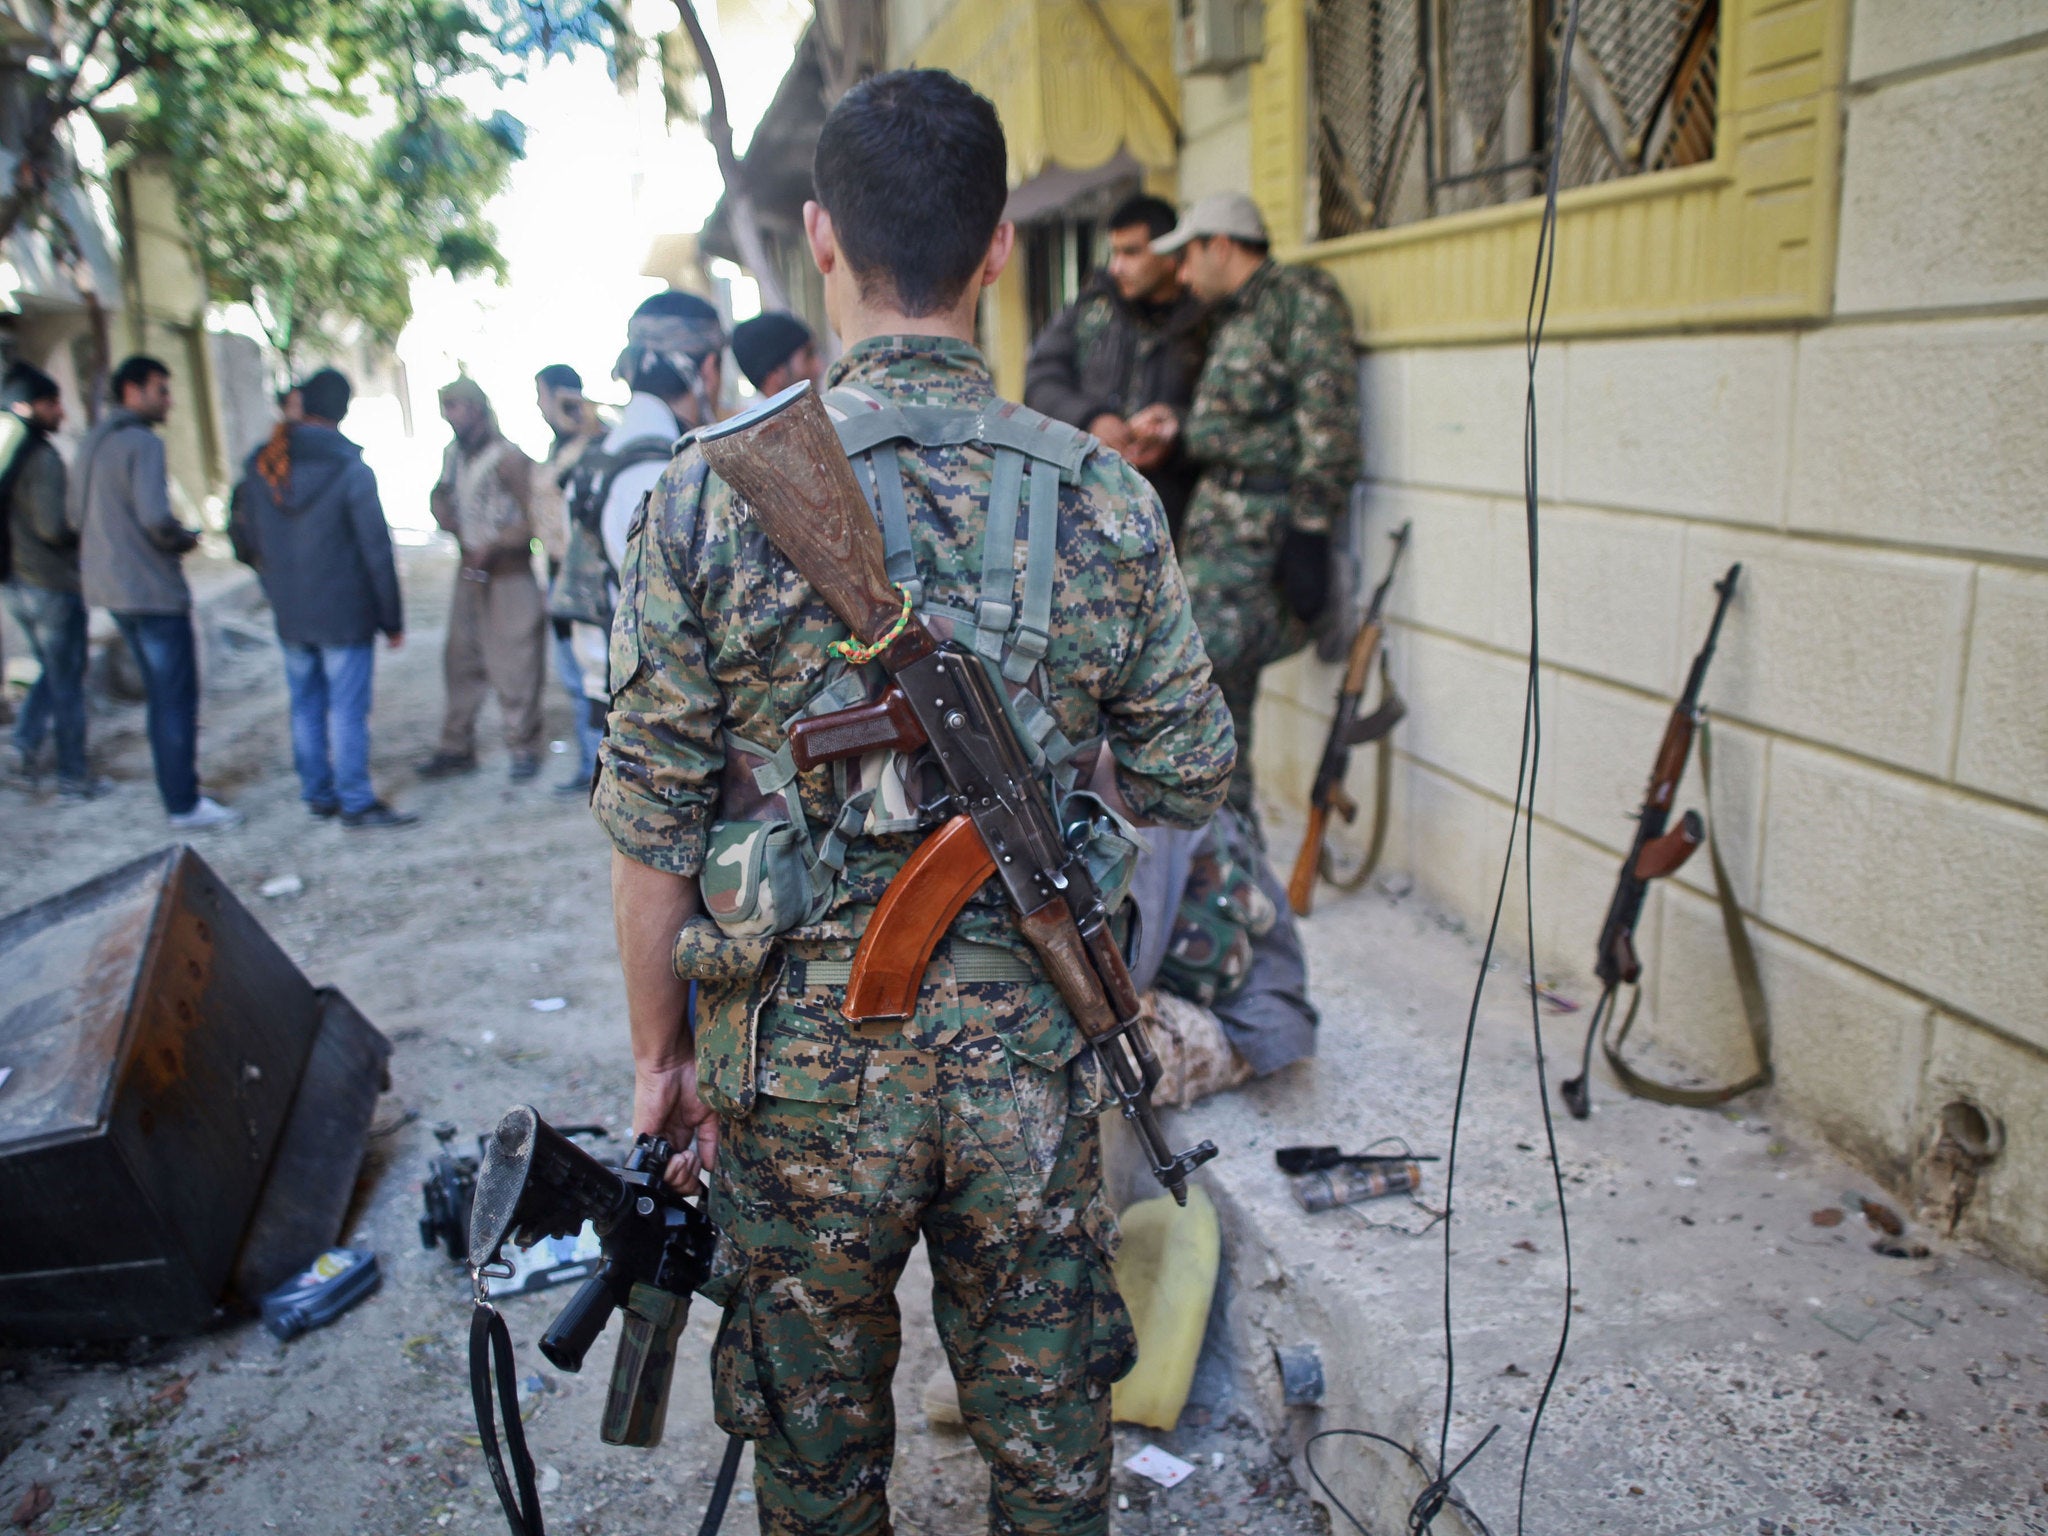 &#13;
Armed fighters of the Syrian Kurdish People's Protection Units (YPG) gather on a street before fighting against Islamic State (IS) group on November 7, 2014&#13;